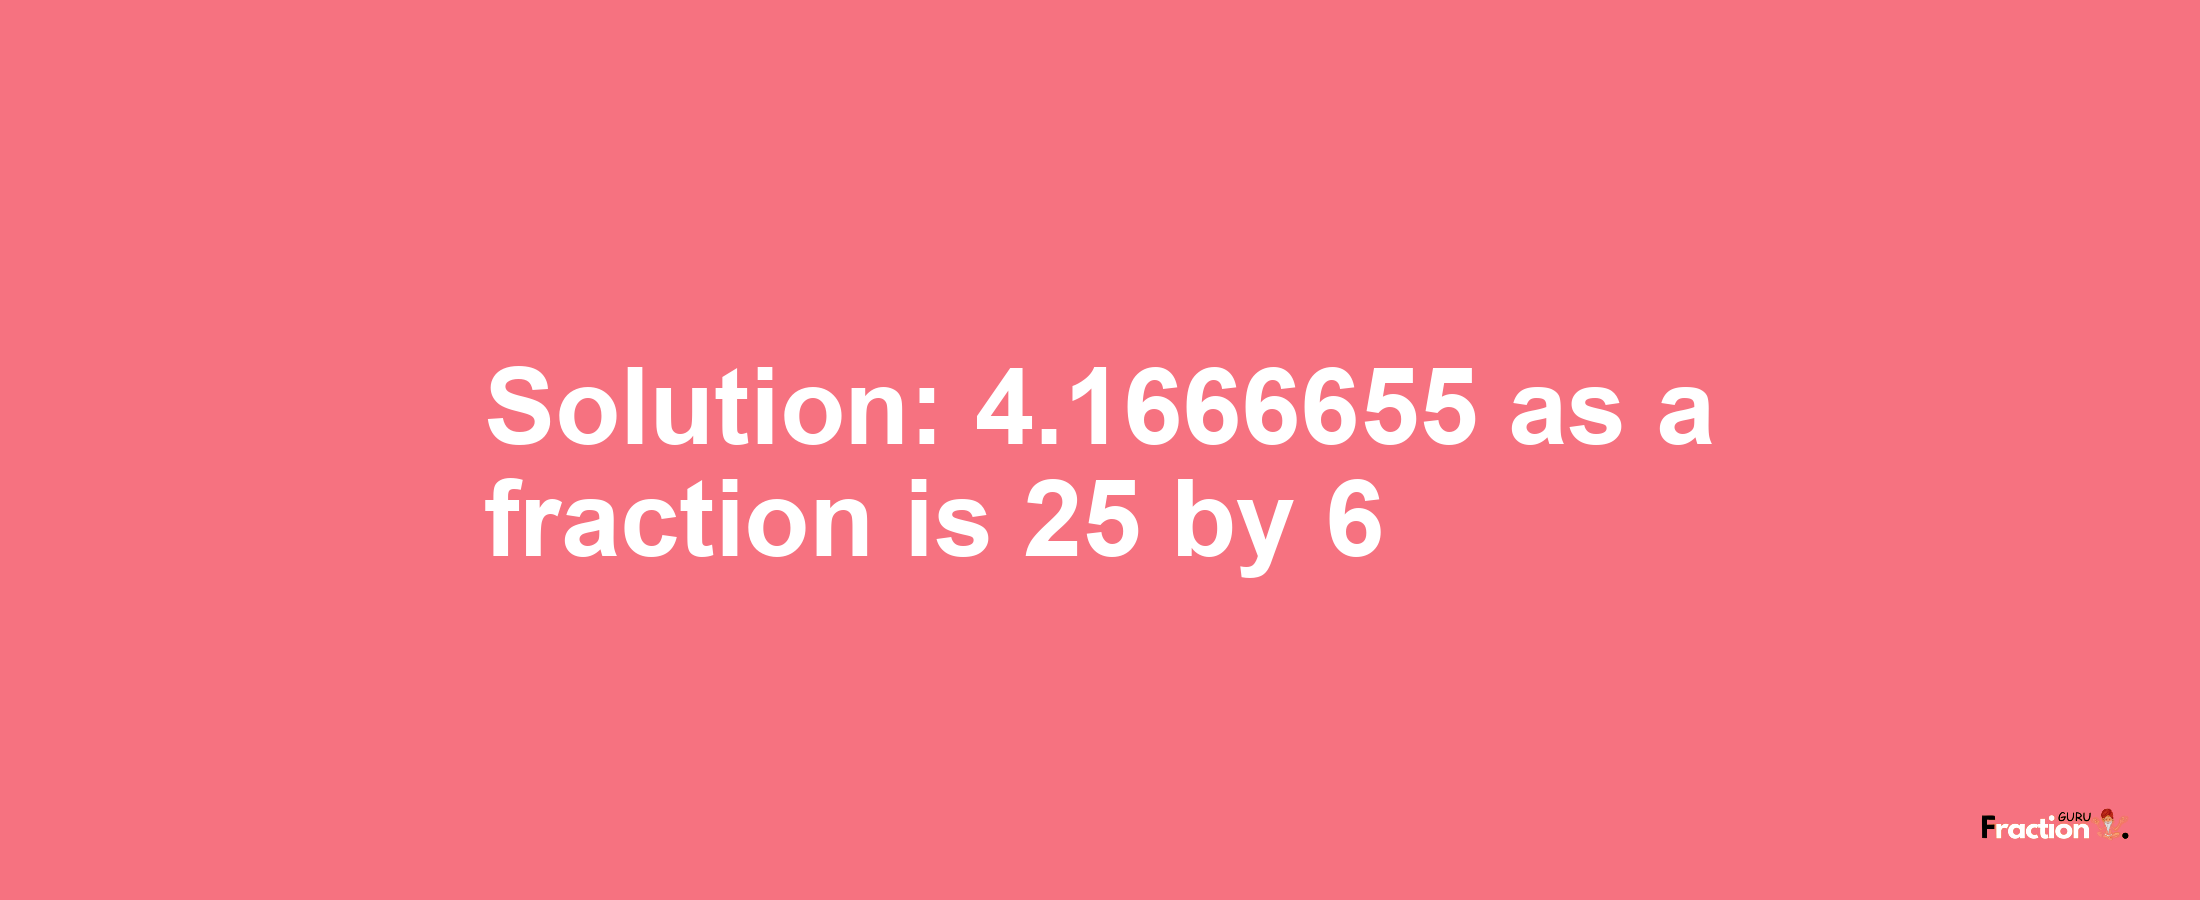 Solution:4.1666655 as a fraction is 25/6